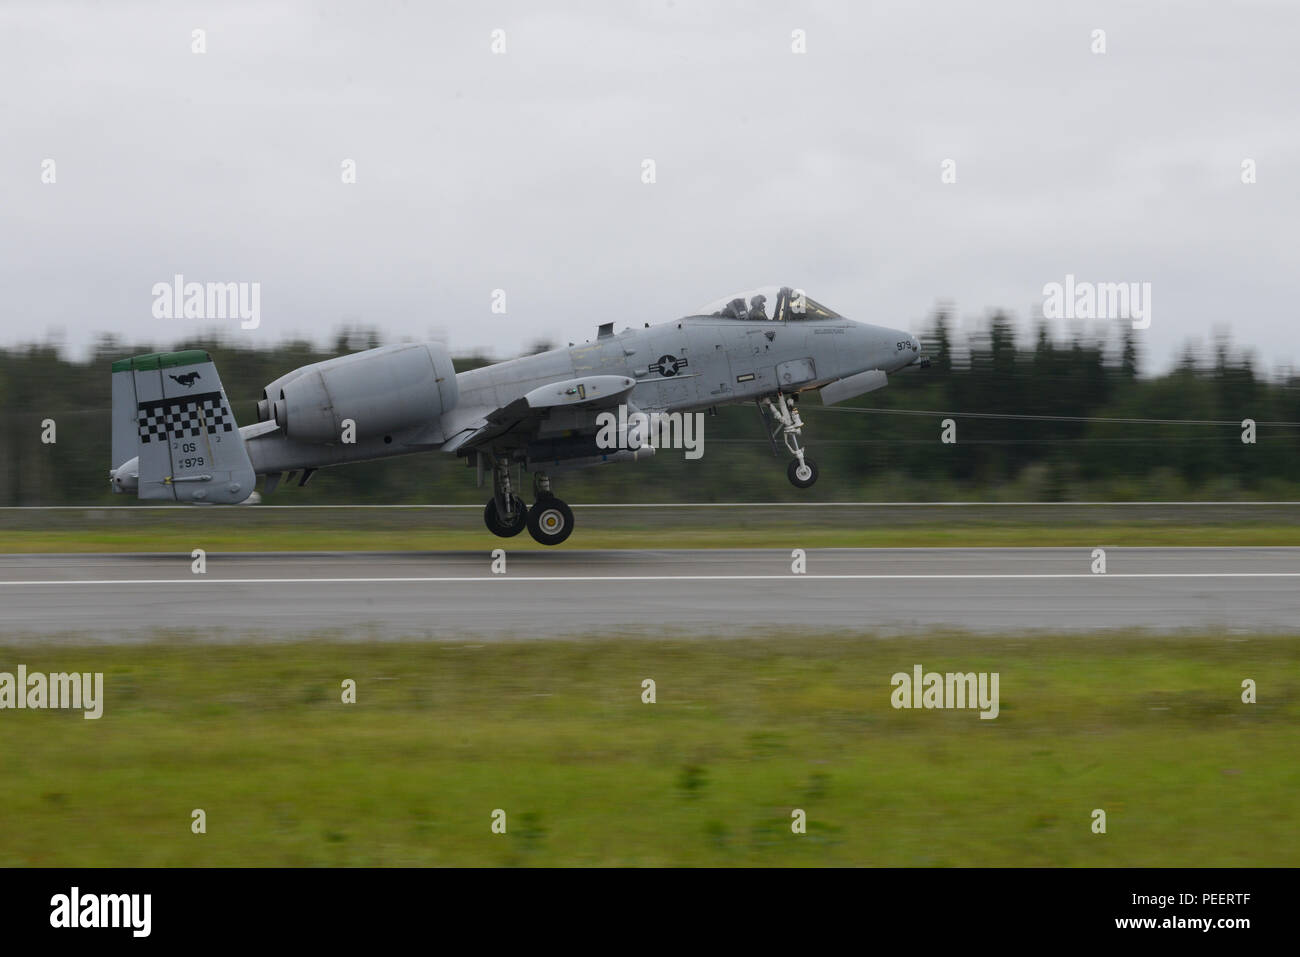 A U.S. Air Force A-10 Thunderbolt II assigned to the 25th Fighter Squadron, Osan Air Base, Republic of Korea, takes off from Eielson Air Force Base, Alaska, Aug. 10, 2015, during Red Flag-Alaska (RF-A) 15-3. RF-A is a series of Pacific Air Forces commander-directed field training exercises for U.S. and partner nation forces, providing combined offensive counter-air, interdiction, close air support and large force employment training in a simulated combat environment. (U.S. Air Force photo by Senior Airman Ashley Nicole Taylor/Released) Stock Photo